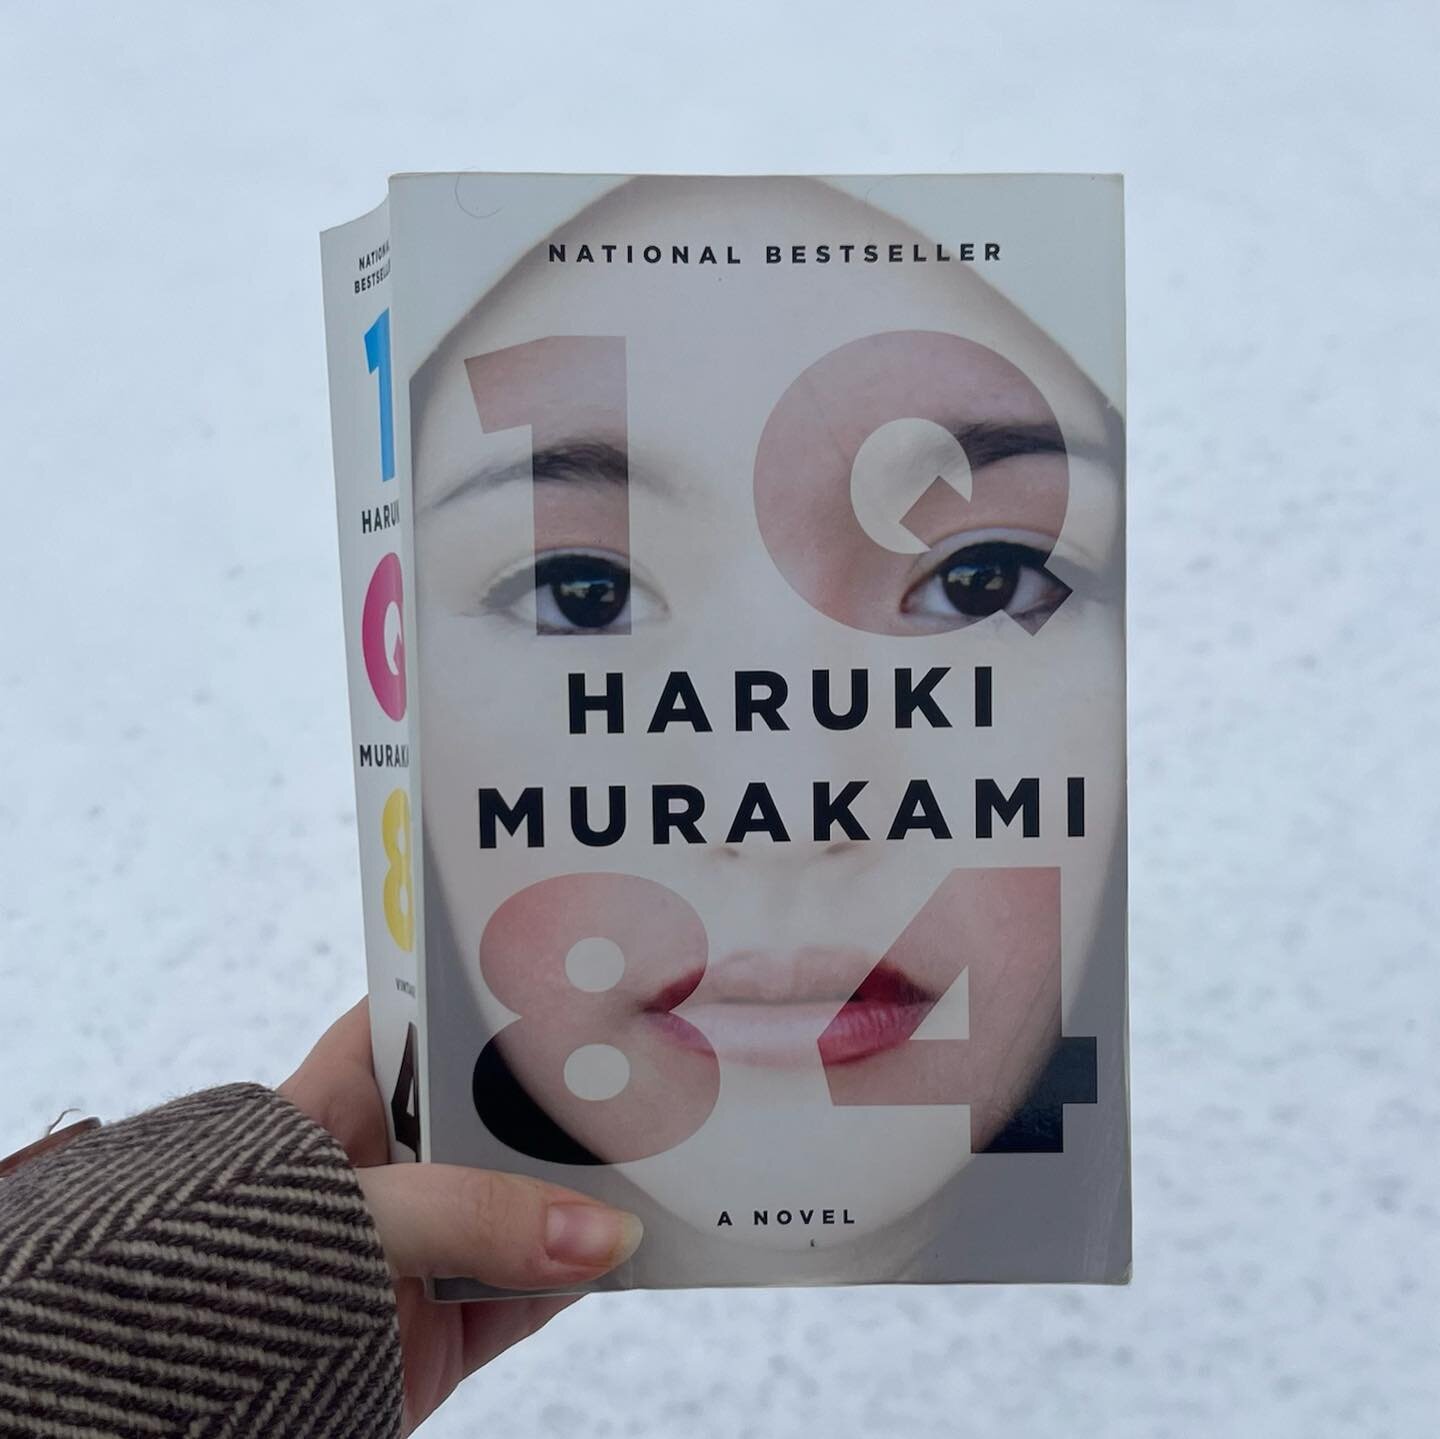 ❄️ Thursday, February 15th ❄️

Bring your busted copies of 1Q84 and join us to discuss chapters 1-12/ pages 1-575 of this iconic dystopian mystery/fantasy/love story ❤️&zwj;🔥

We'll meet for the second half of the book in March.